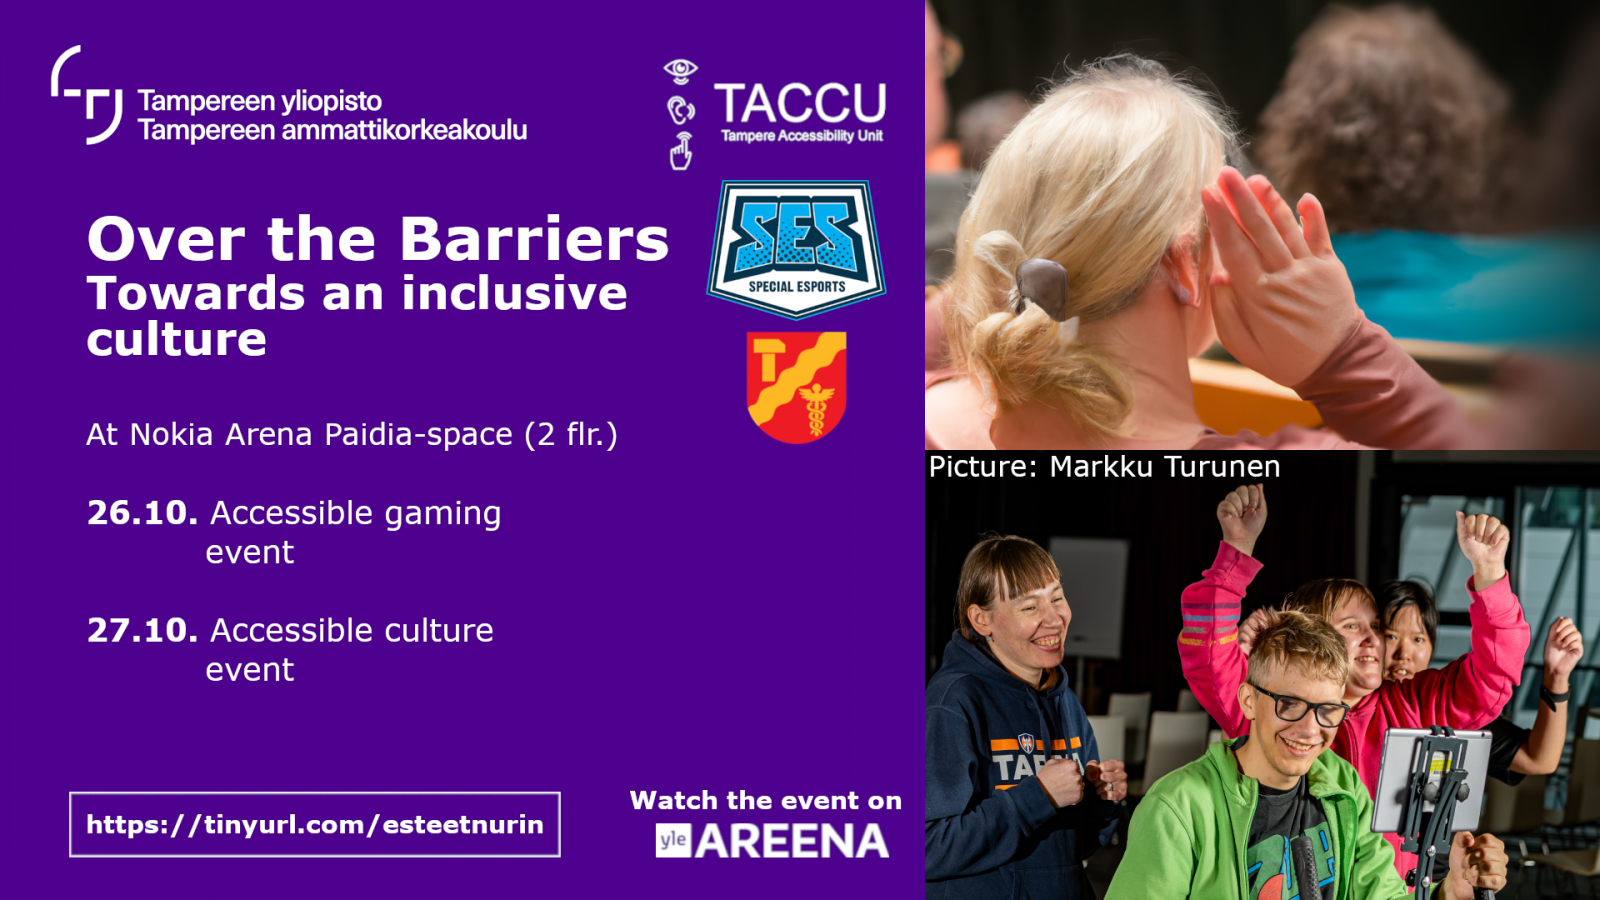 Advertisement image for "Over the barriers" event. The image displays the event schedule, with the accessible gaming event on October 26th and the accessible culture event on October 27th.